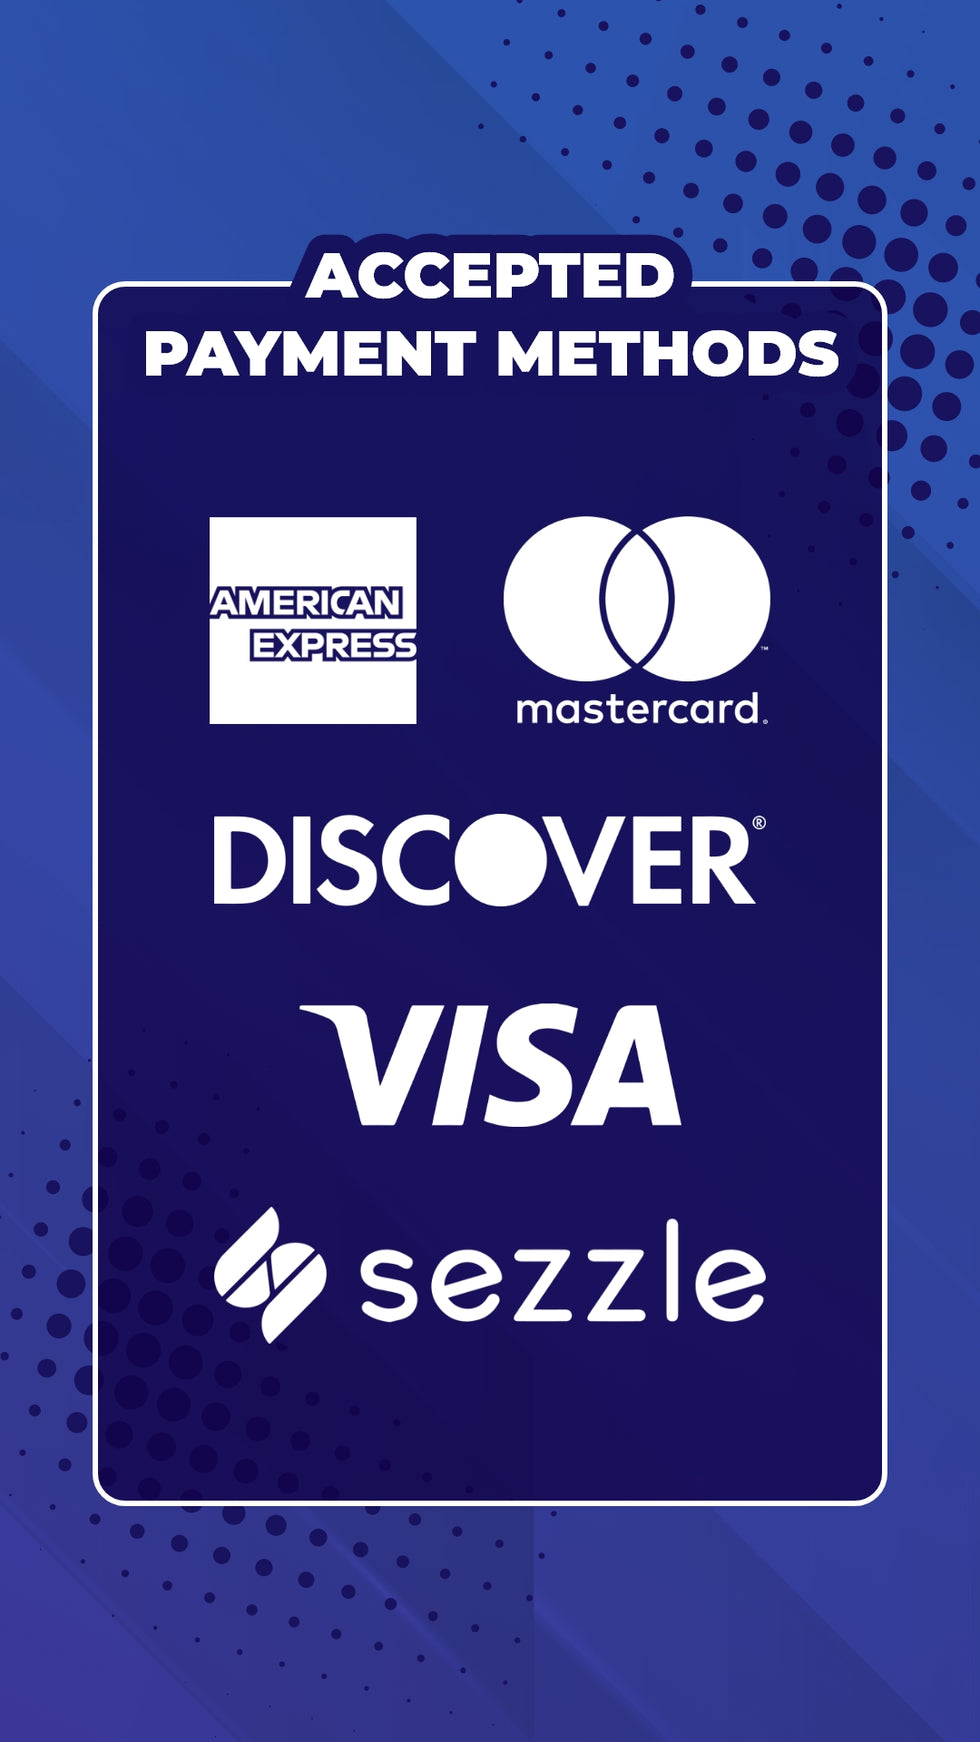 Accepted Payment Methods: American Express, Mastercard, Discover, Visa, and Sezzle.